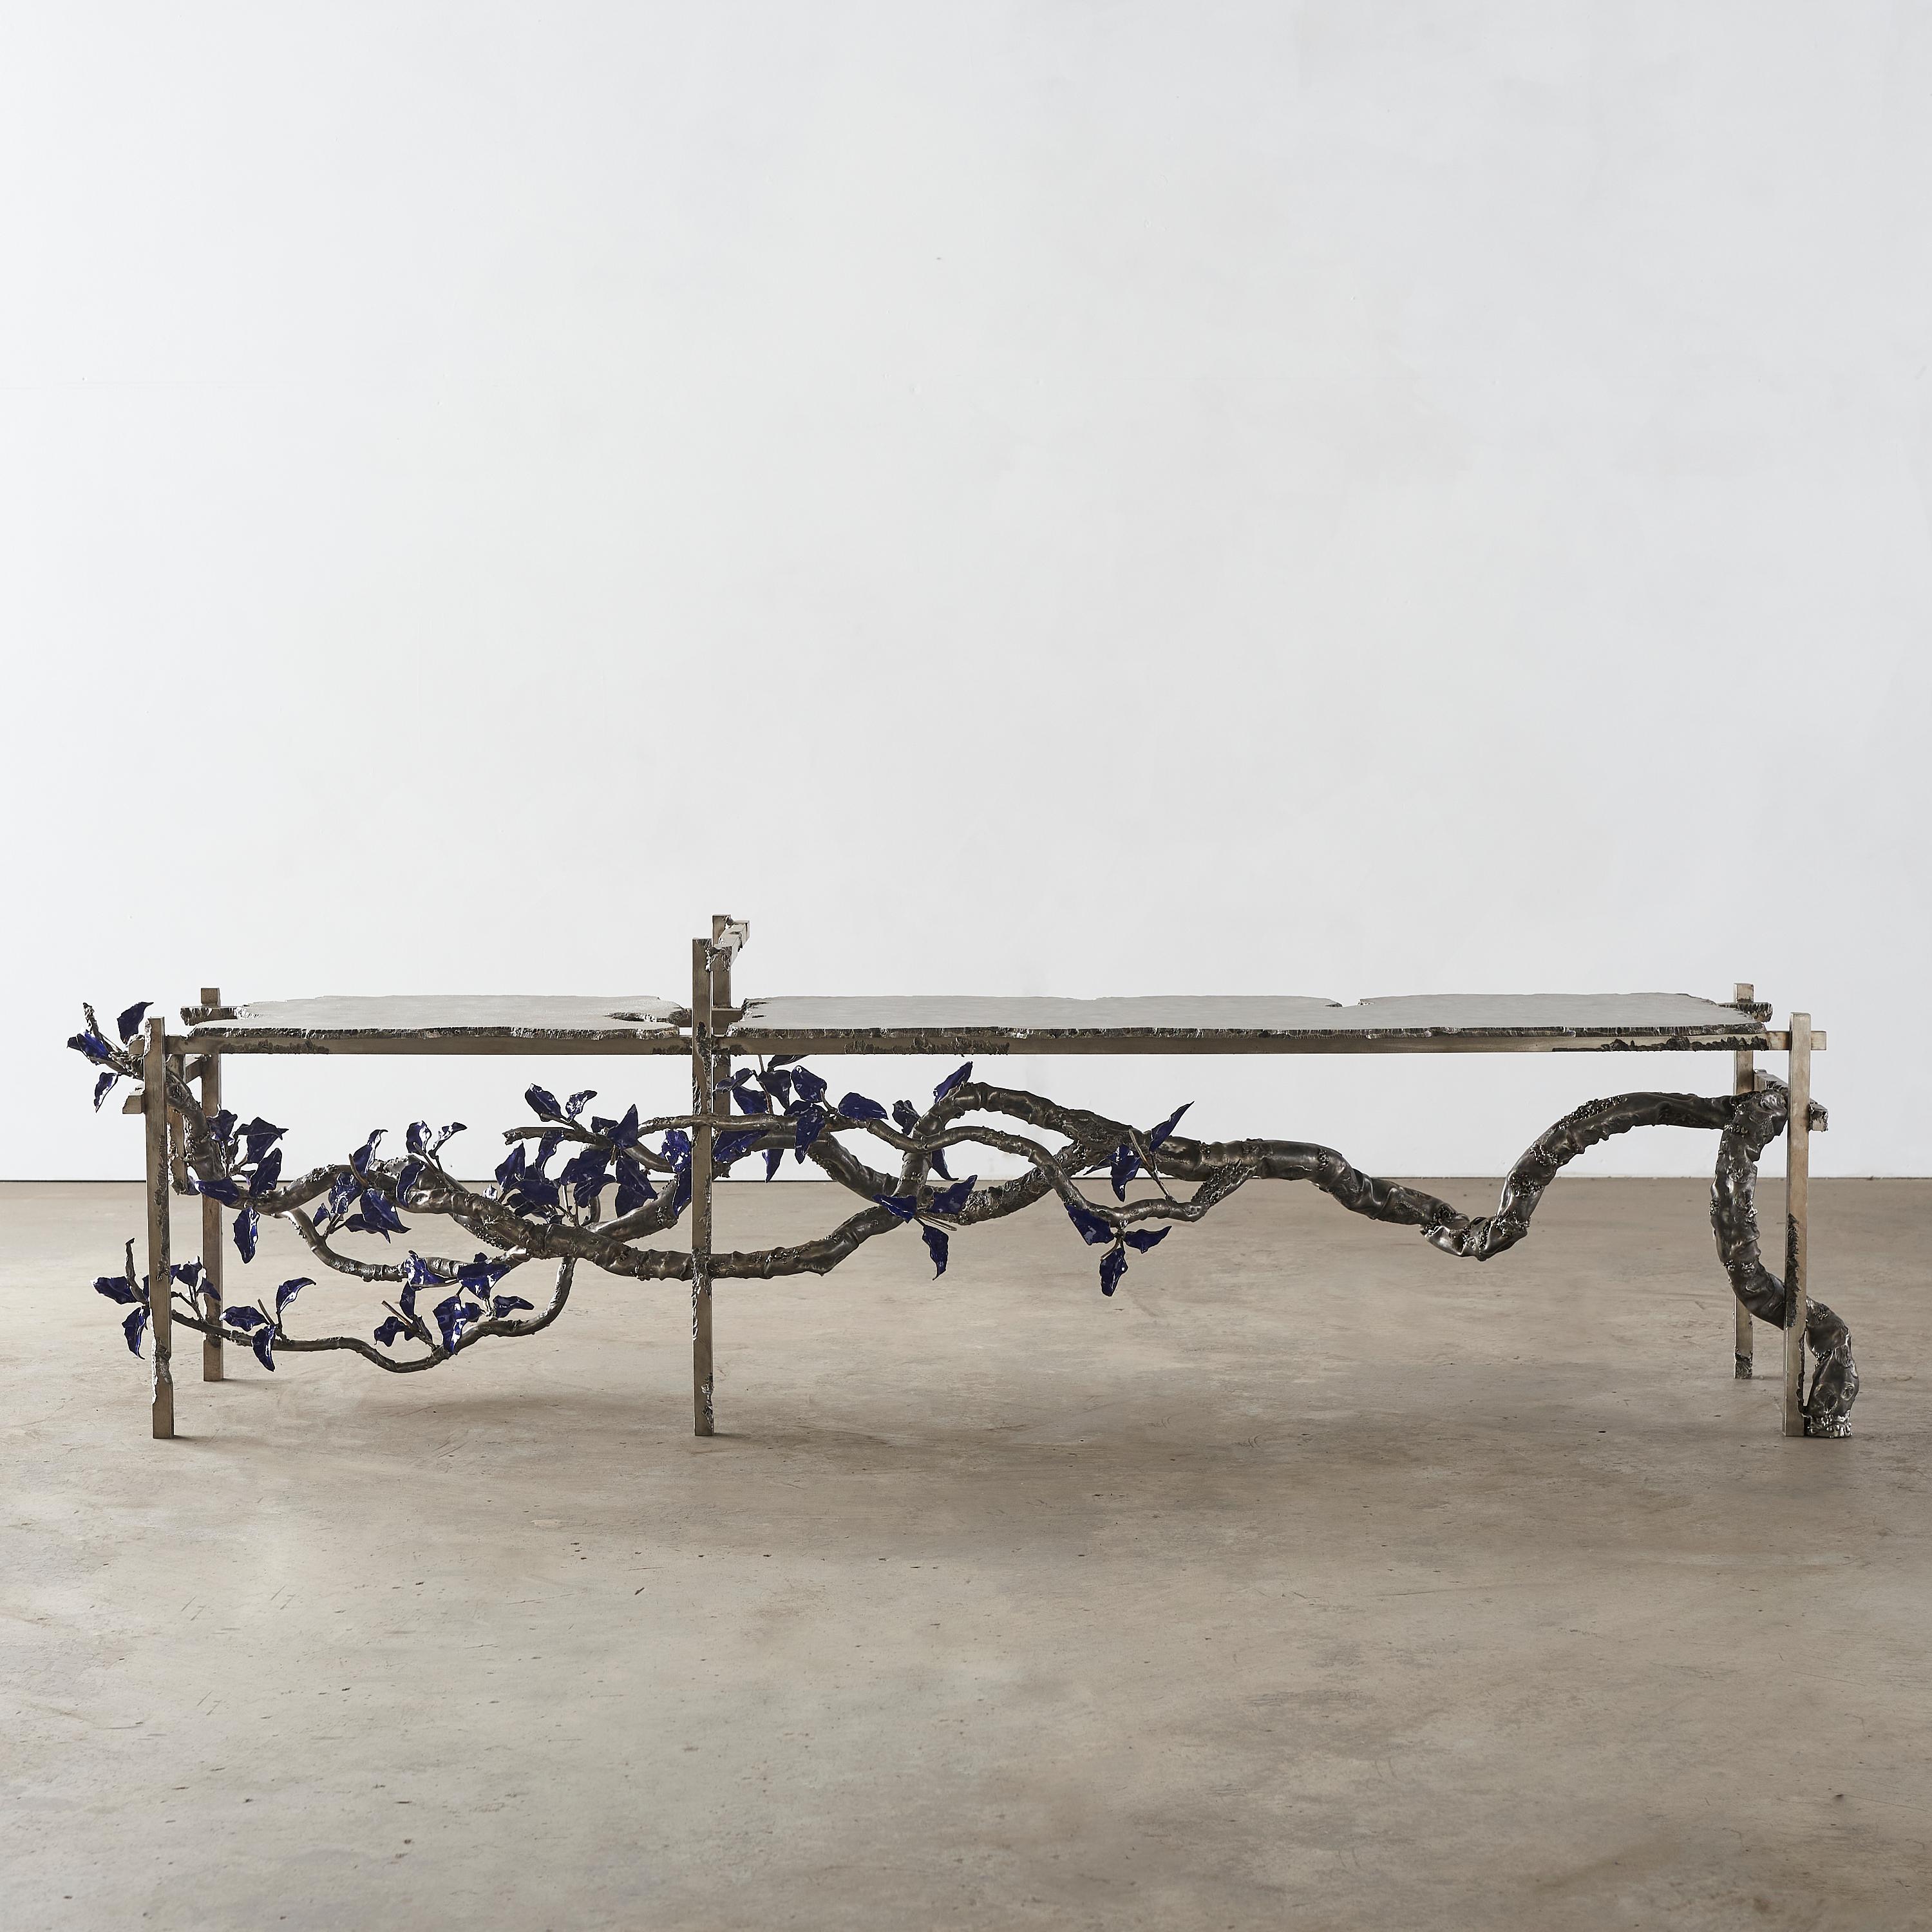 Novalis bench by Michael Gittings Studio
One of a Kind
Dimensions: d 40 x w 190 x h 50 cm
Materials: stainless steel, copper, enamel

Michael Gittings
Melbourne based designer Michael Gittings aims to
Challenge pre-conceptions around